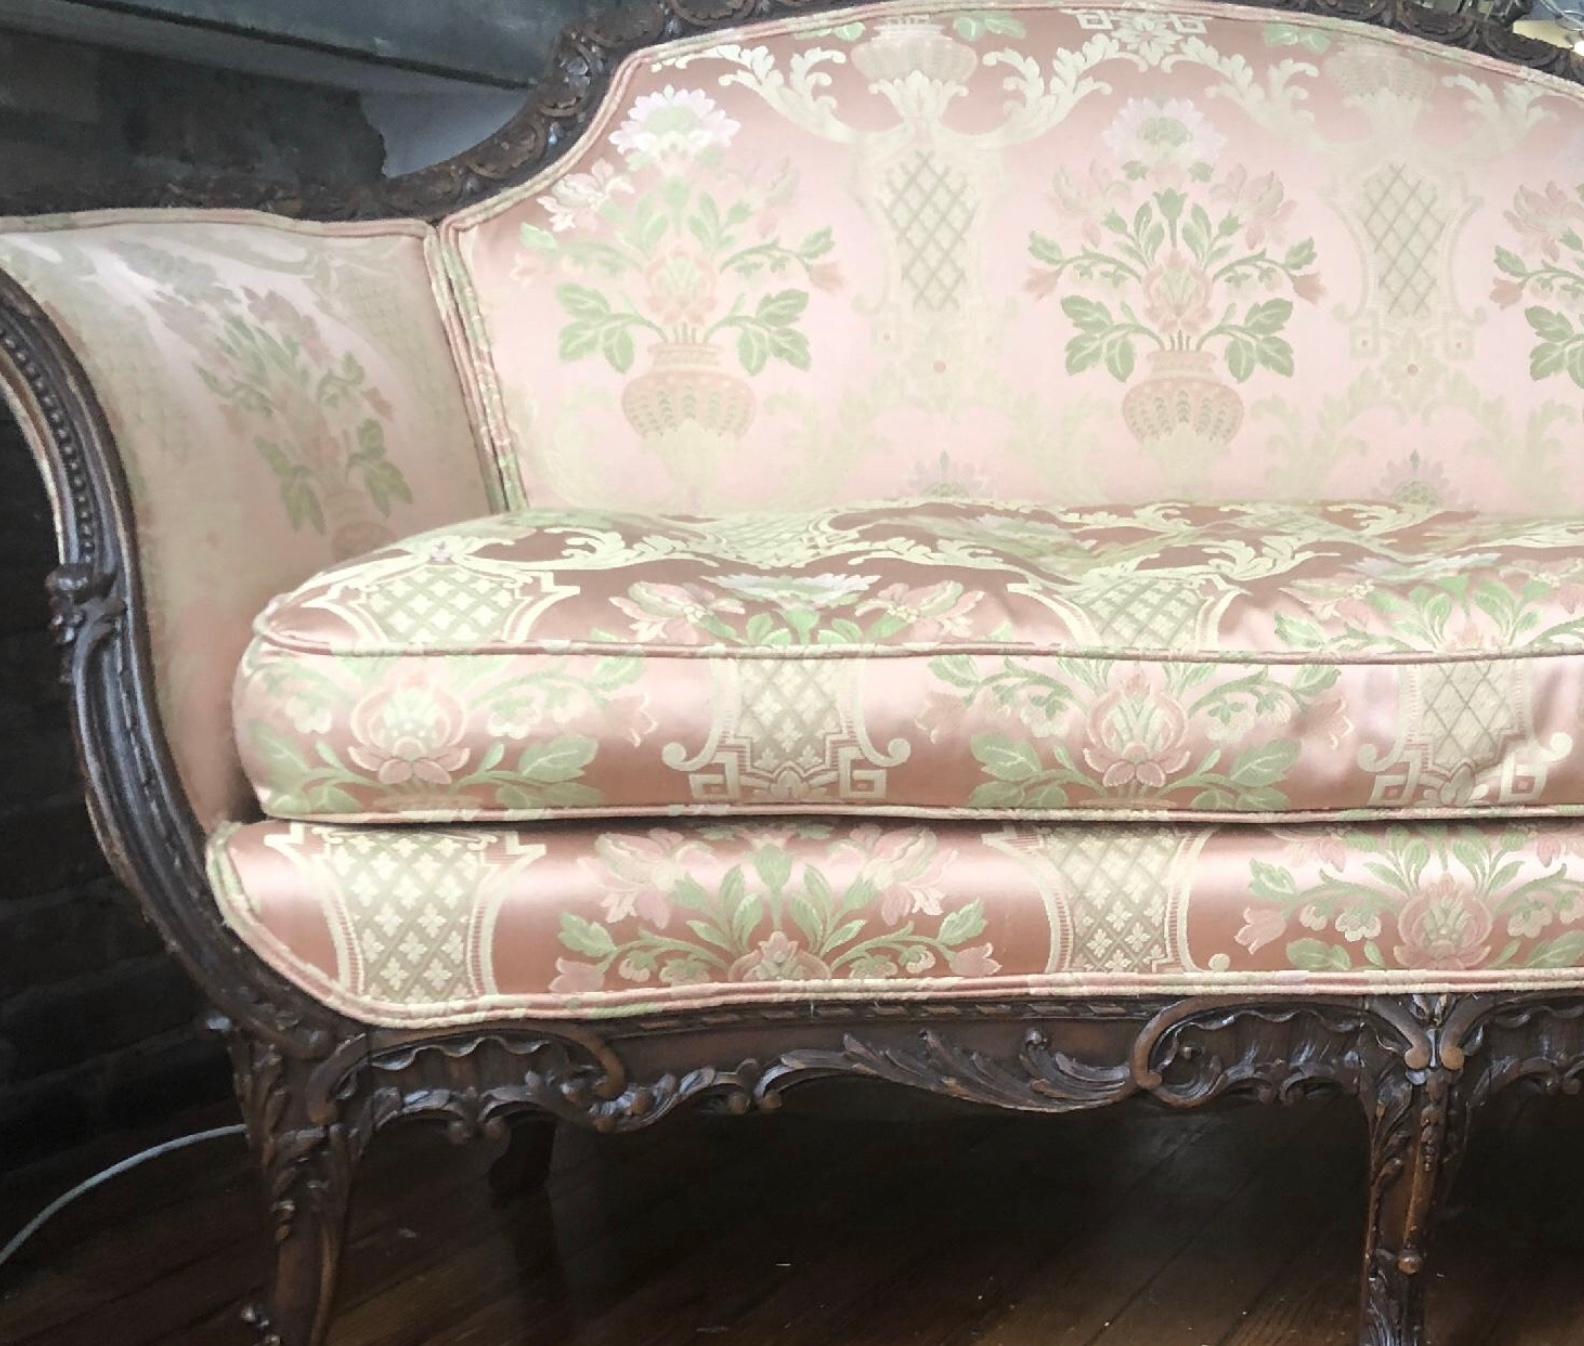 Gorgeous 19th salamander silk loveseat / settee in stunning iridescent blush with gentle sea foam chinoiserie embroidery work. Lovely lines and intricate glorious work. Down cushion, sloping wide arms perfect as headrest. American Empire (Empire